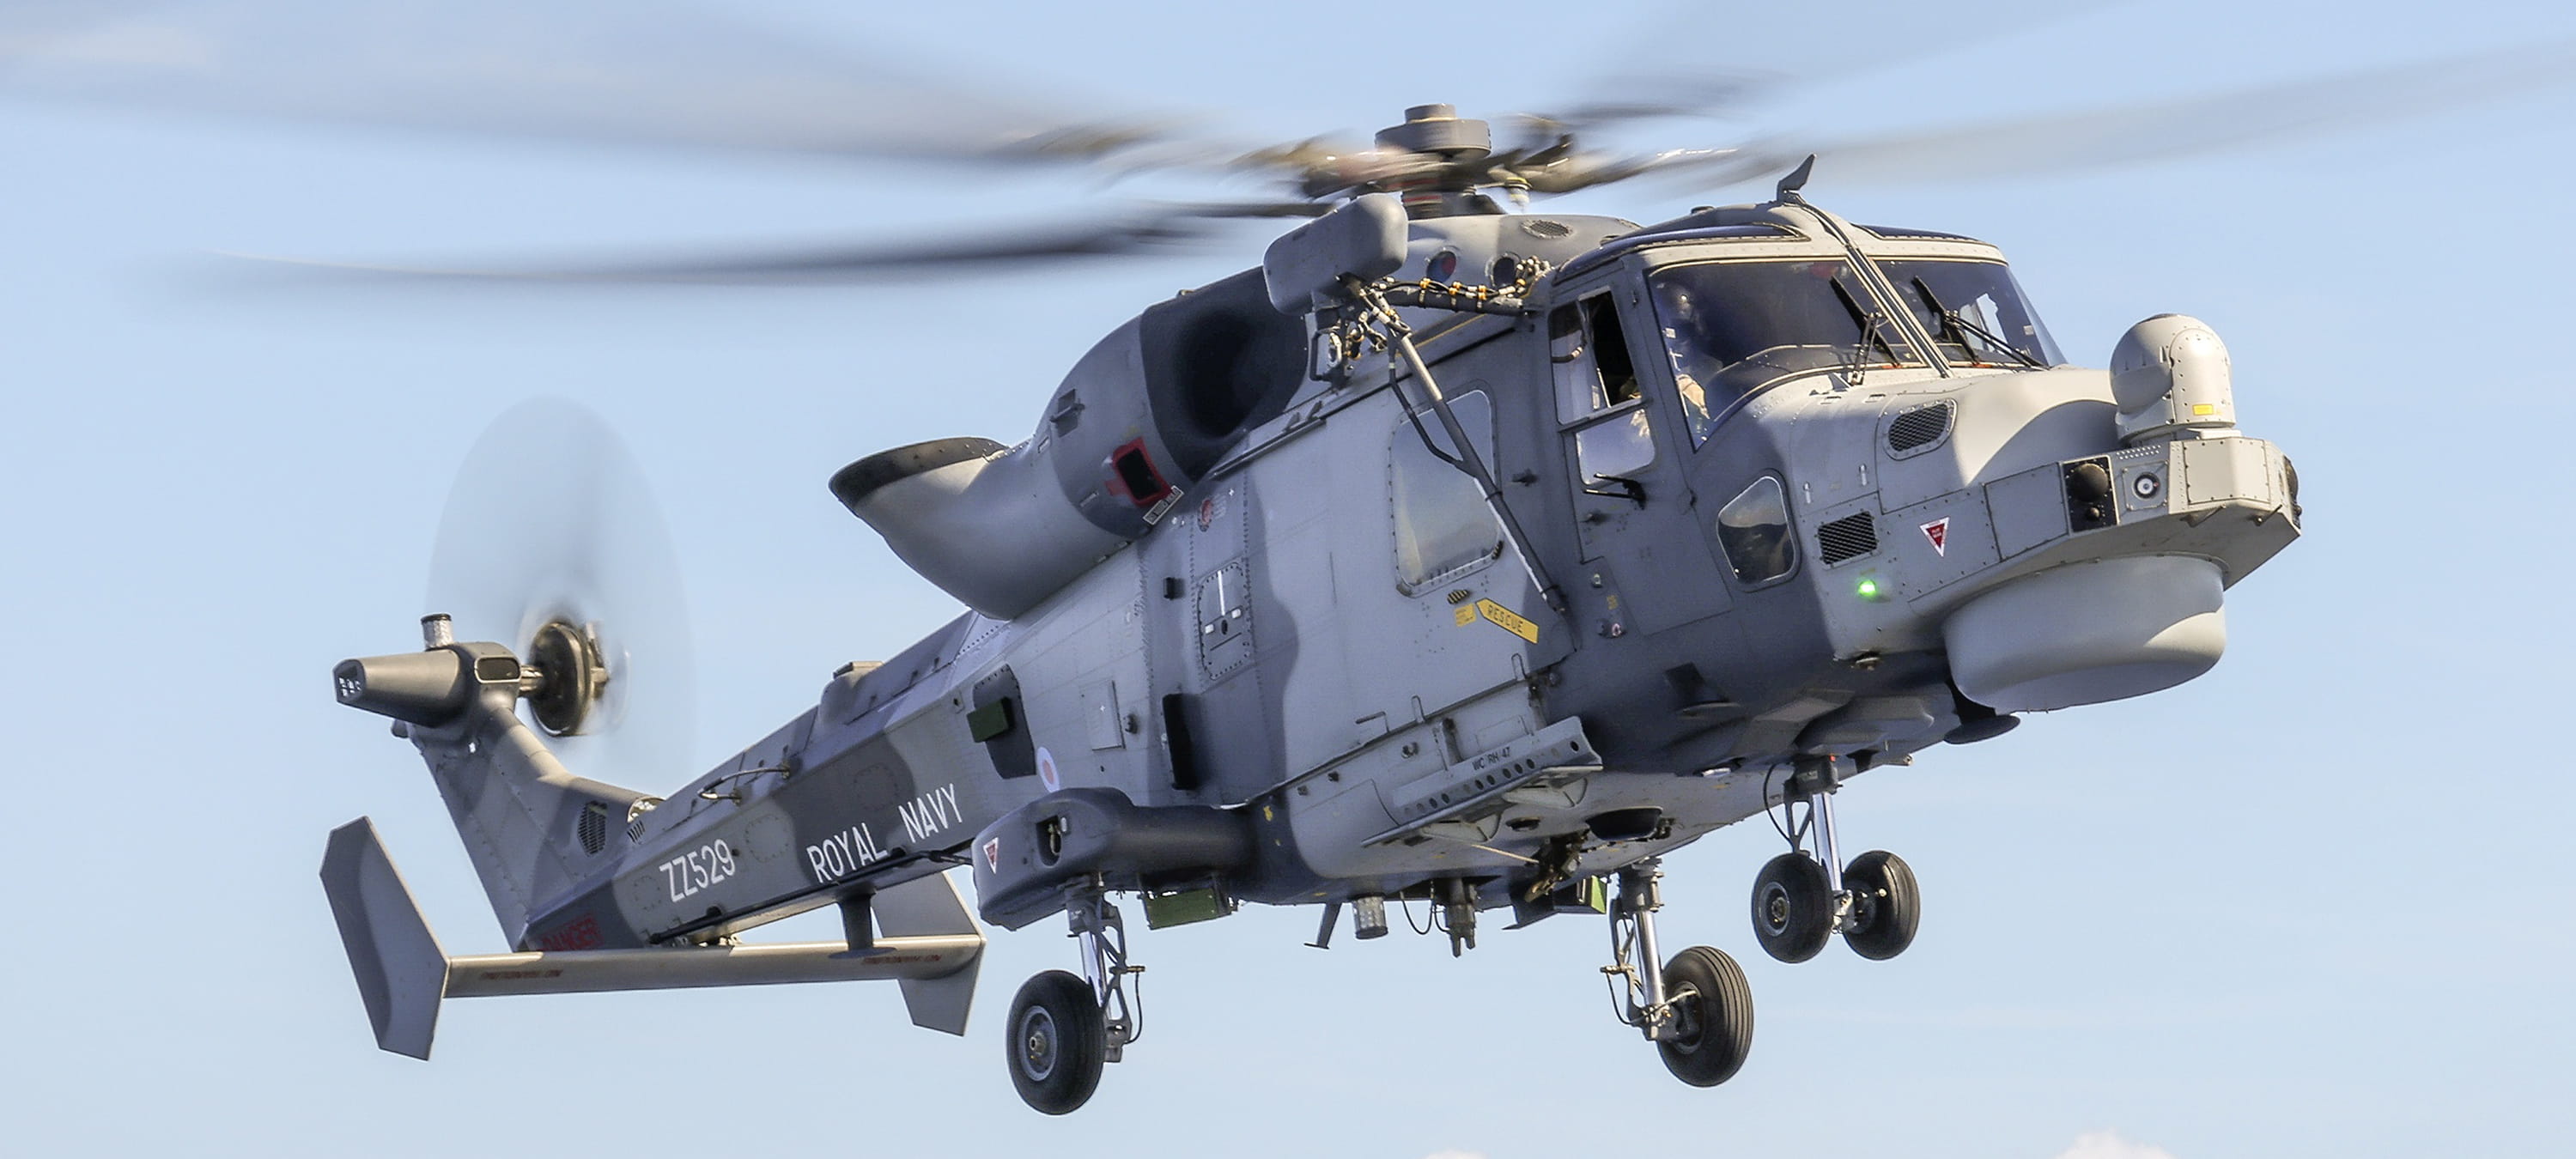 A Royal Navy Wildcat helicopter in flight